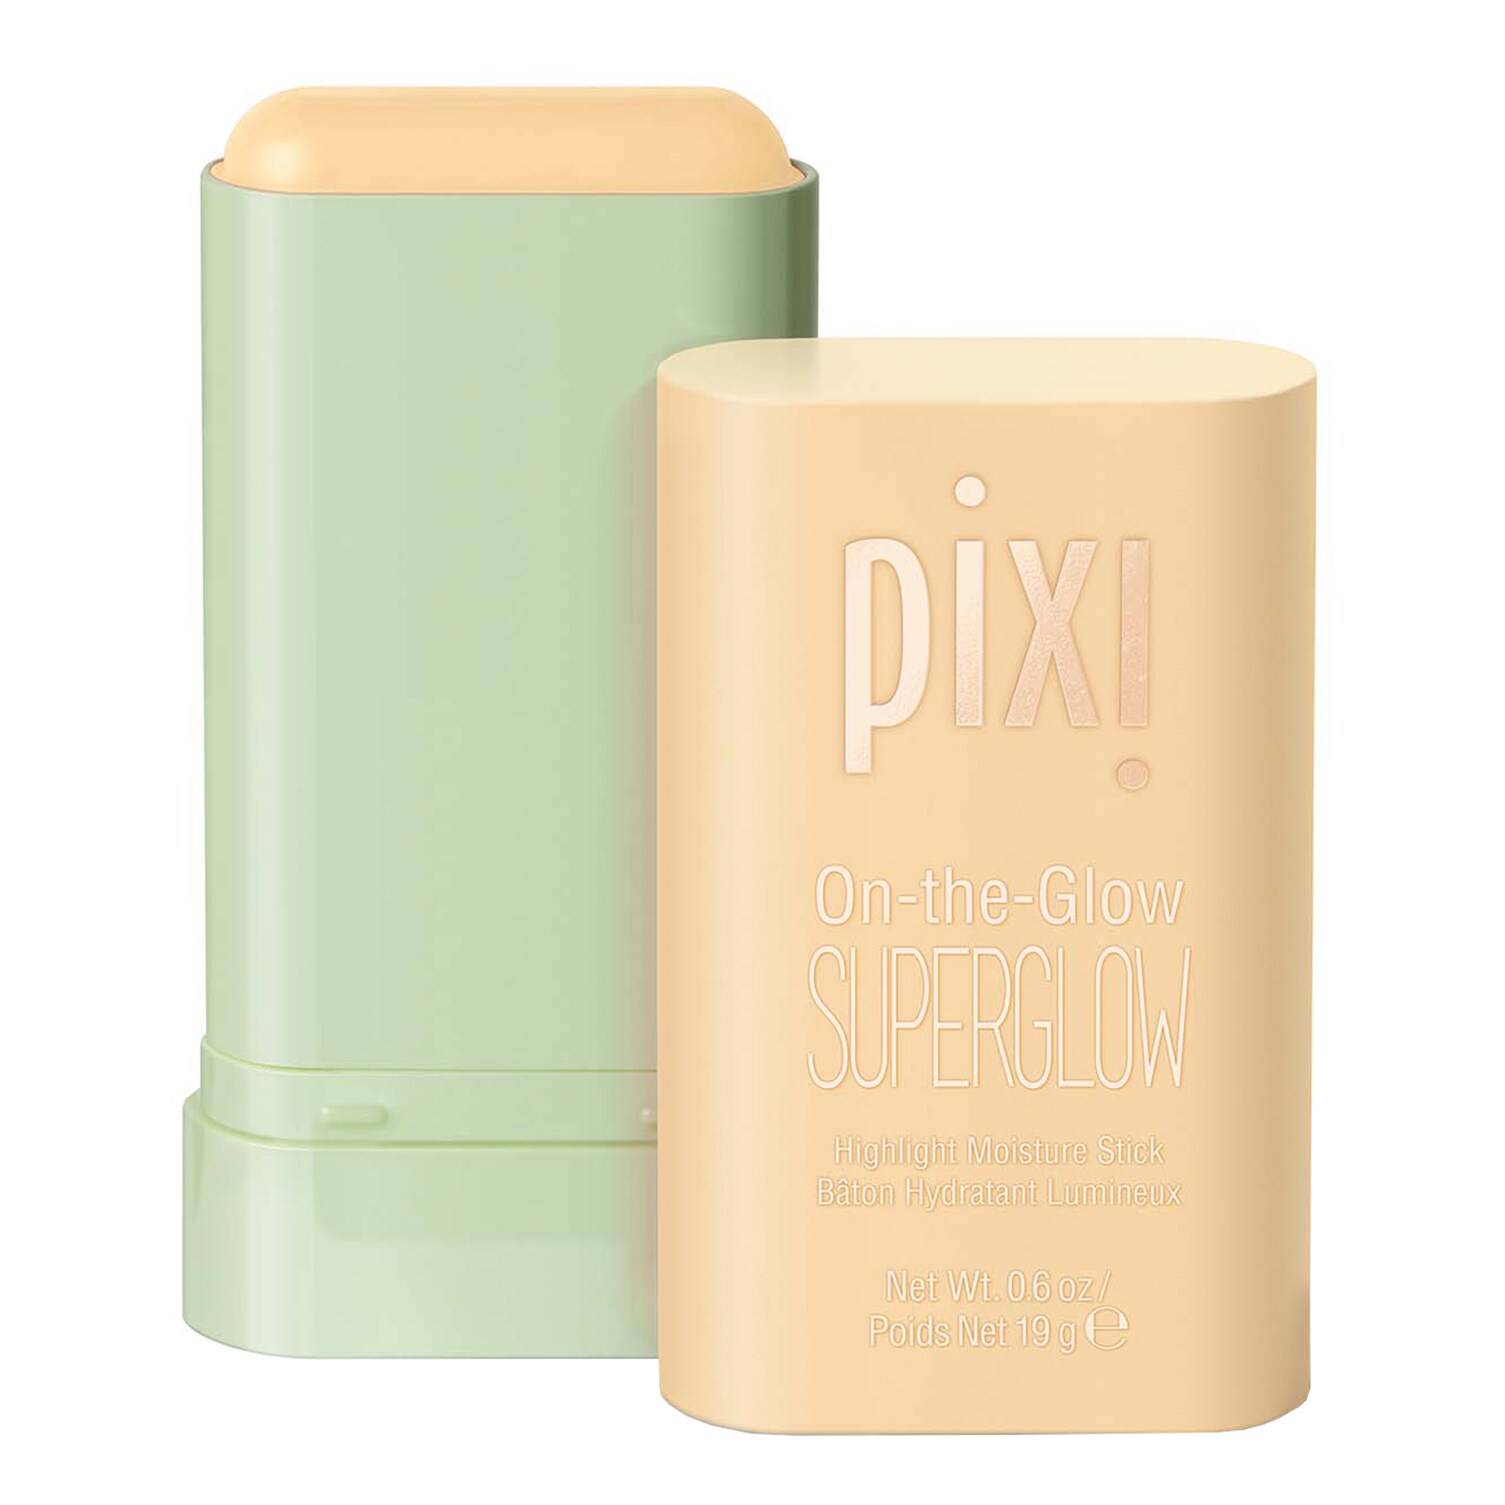 Pixi On-The-Glow Superglow 19G Gilded Gold